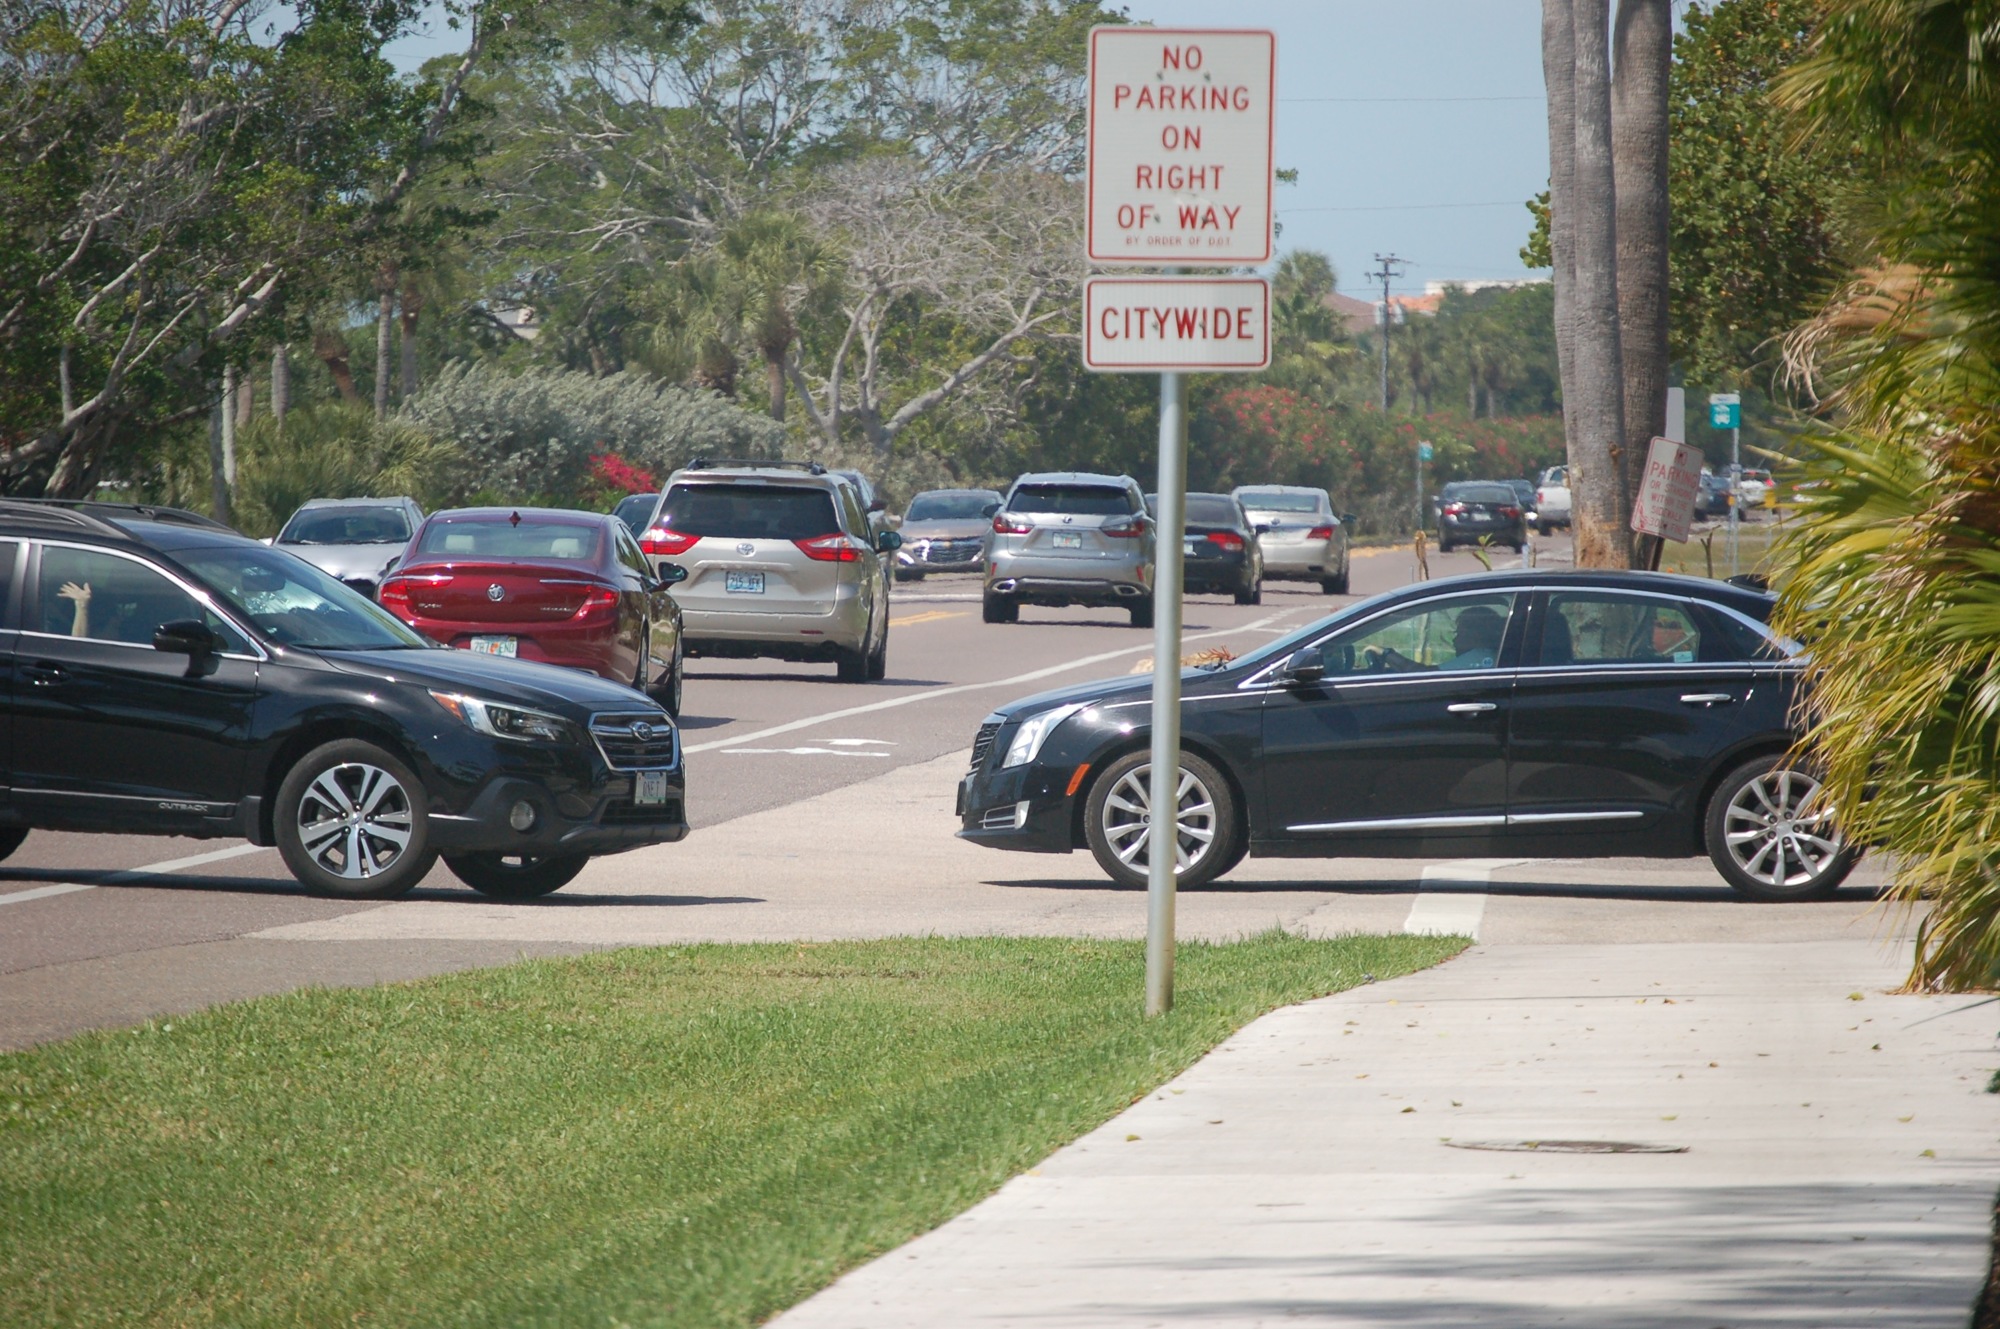  Seasonal traffic, such as this scene in March, is  a consistent complaint among Longboat Key residents and visitors.